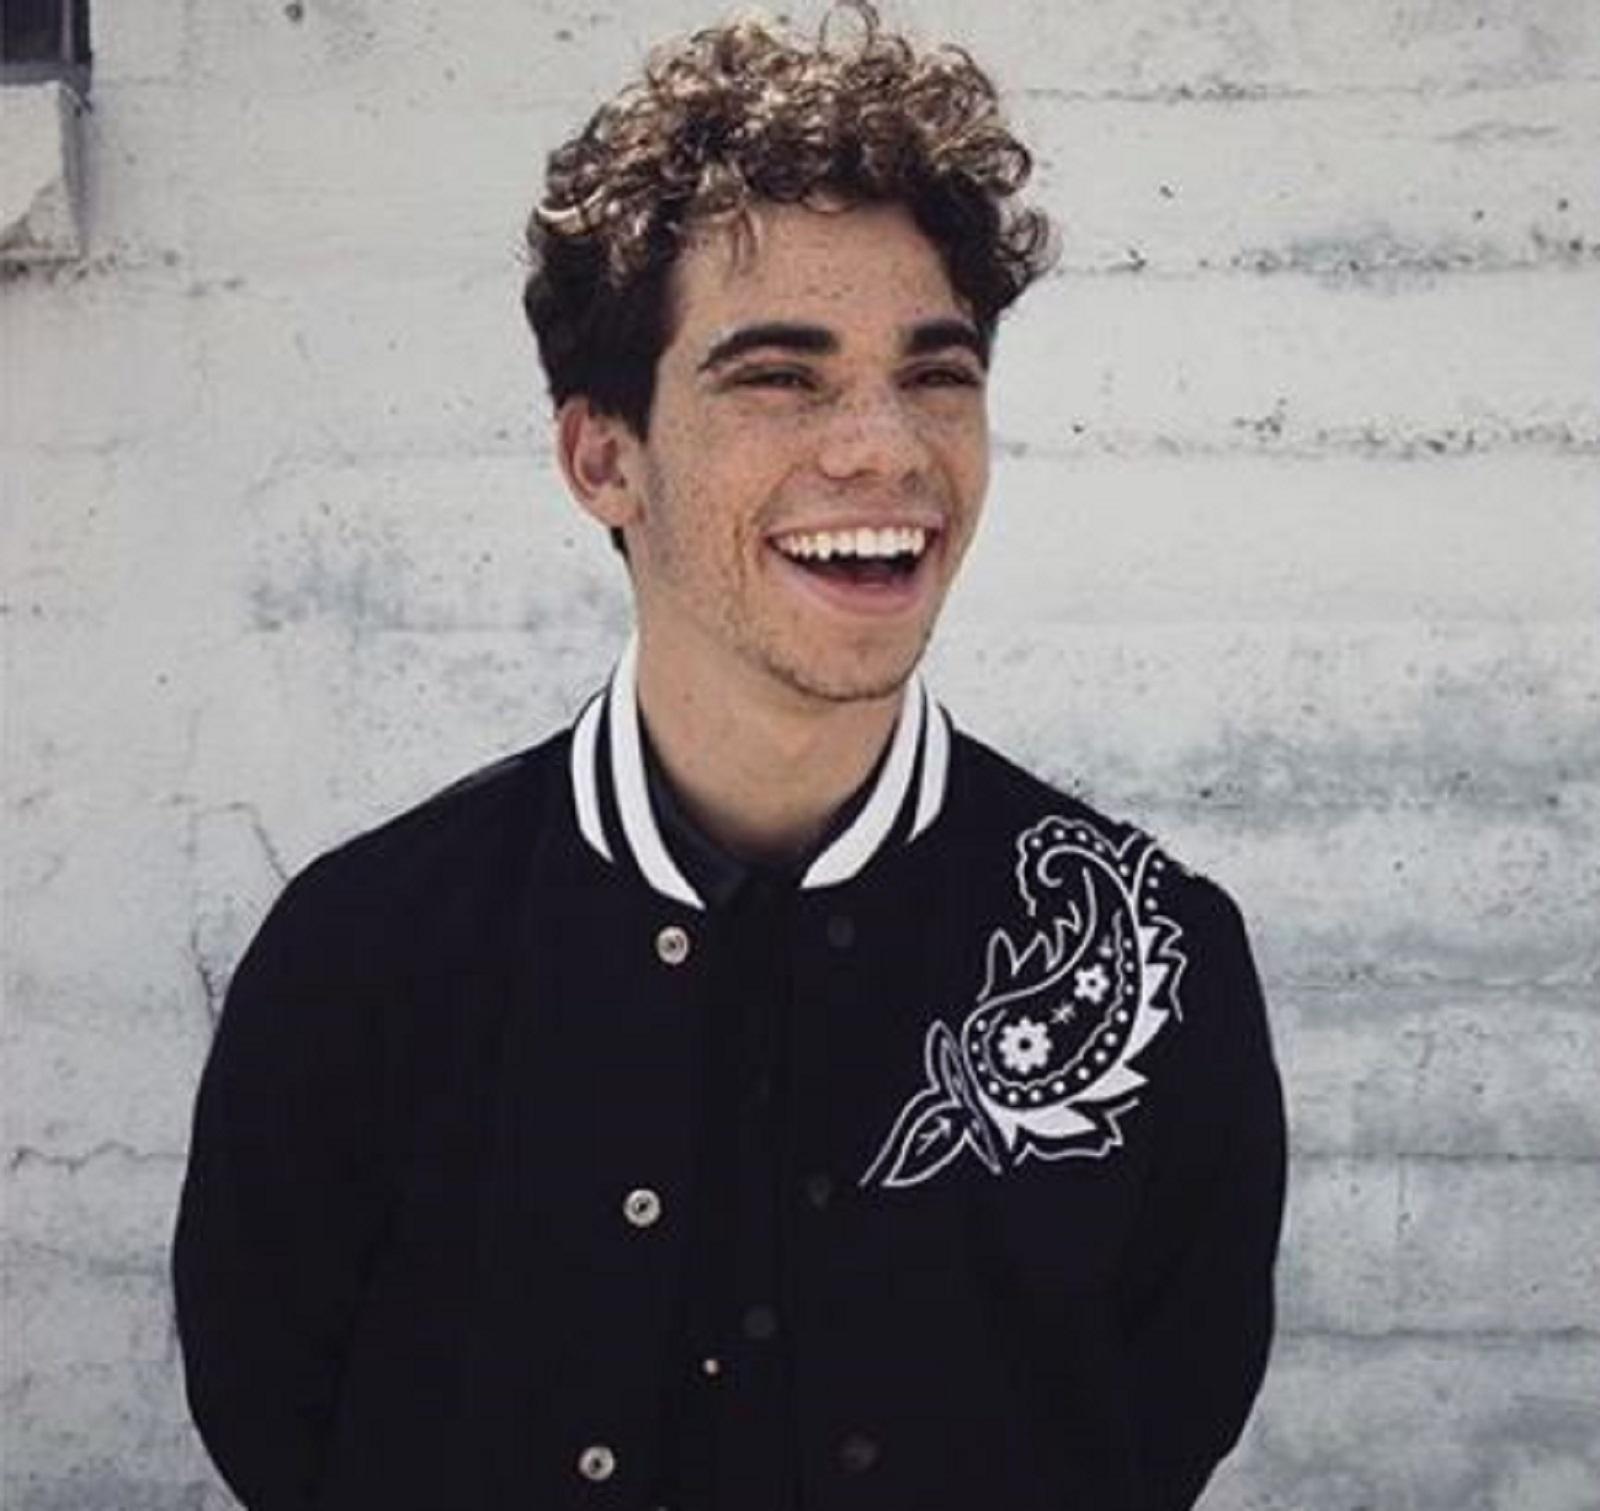 Disney actor from 'Jessie' Cameron Boyce dies at age 20